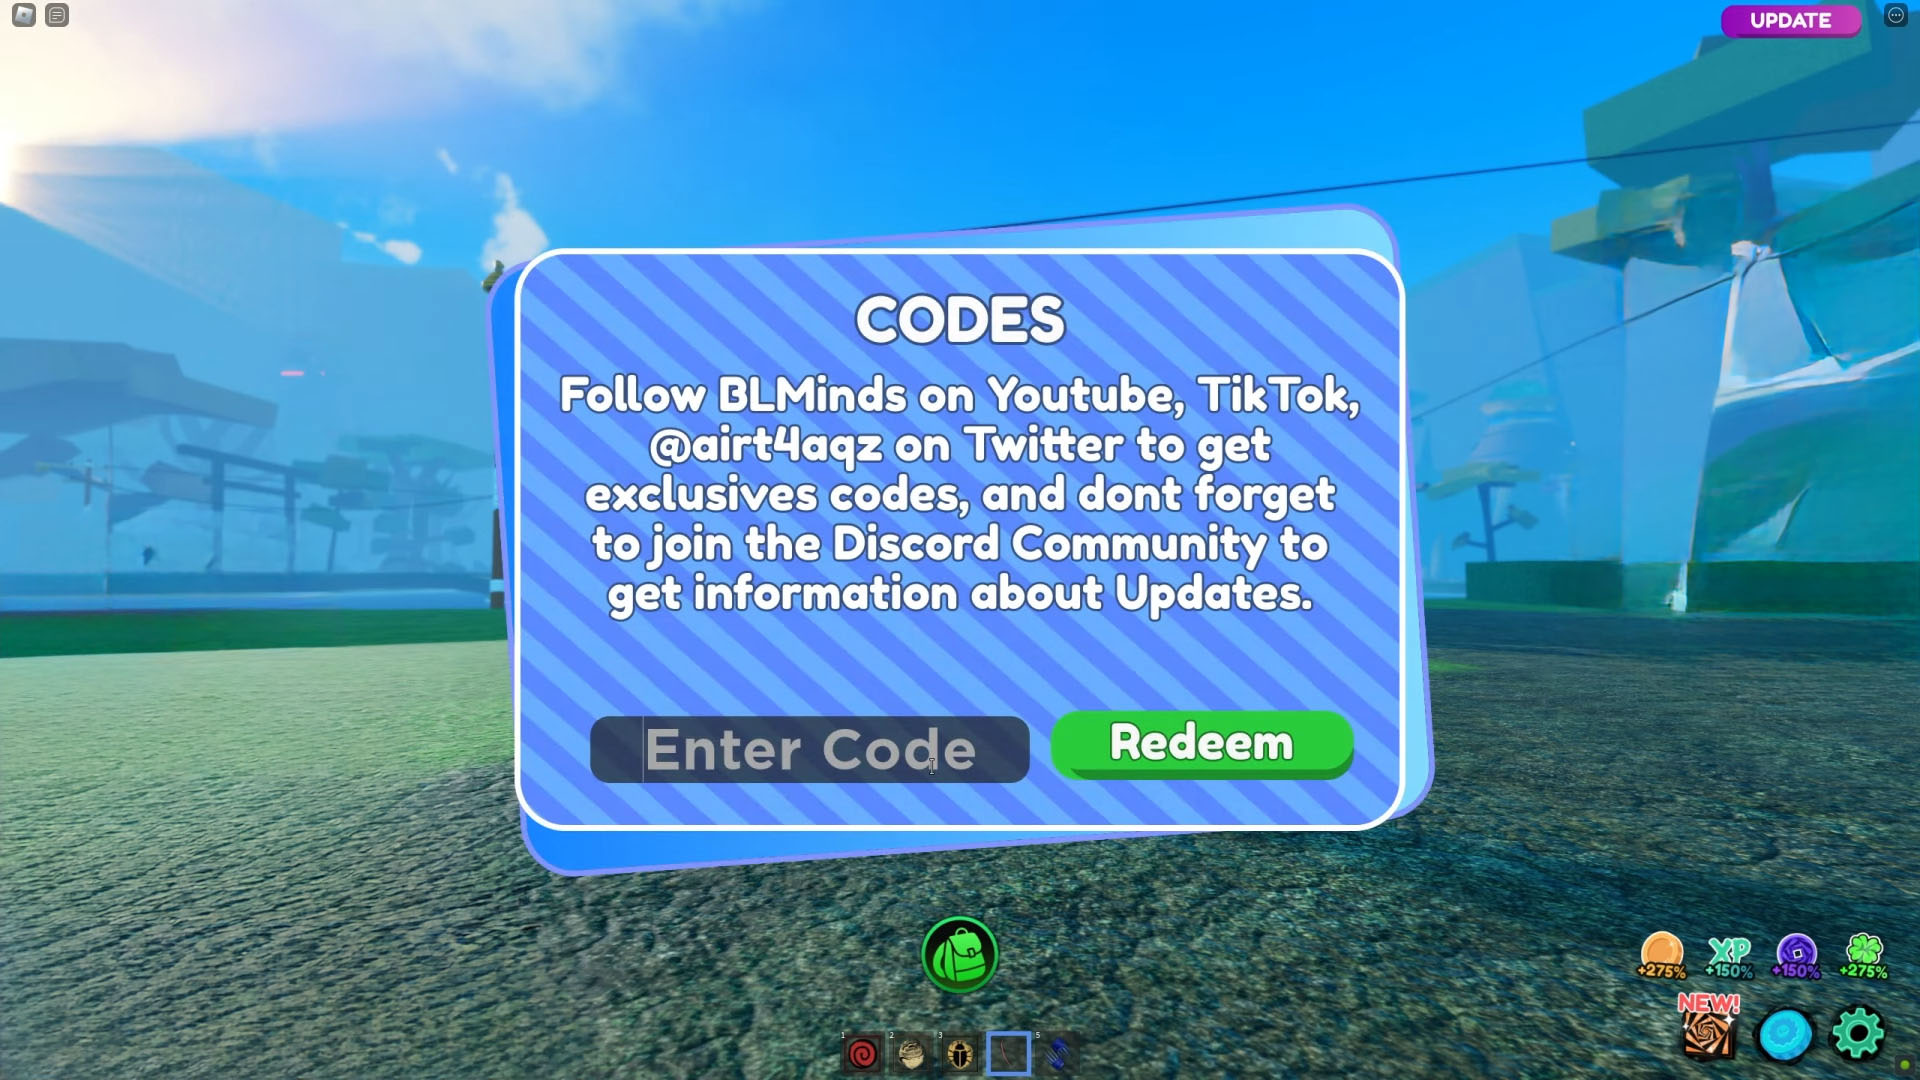 Kage Tycoon codes (November 2023) - free XP boosts, and more